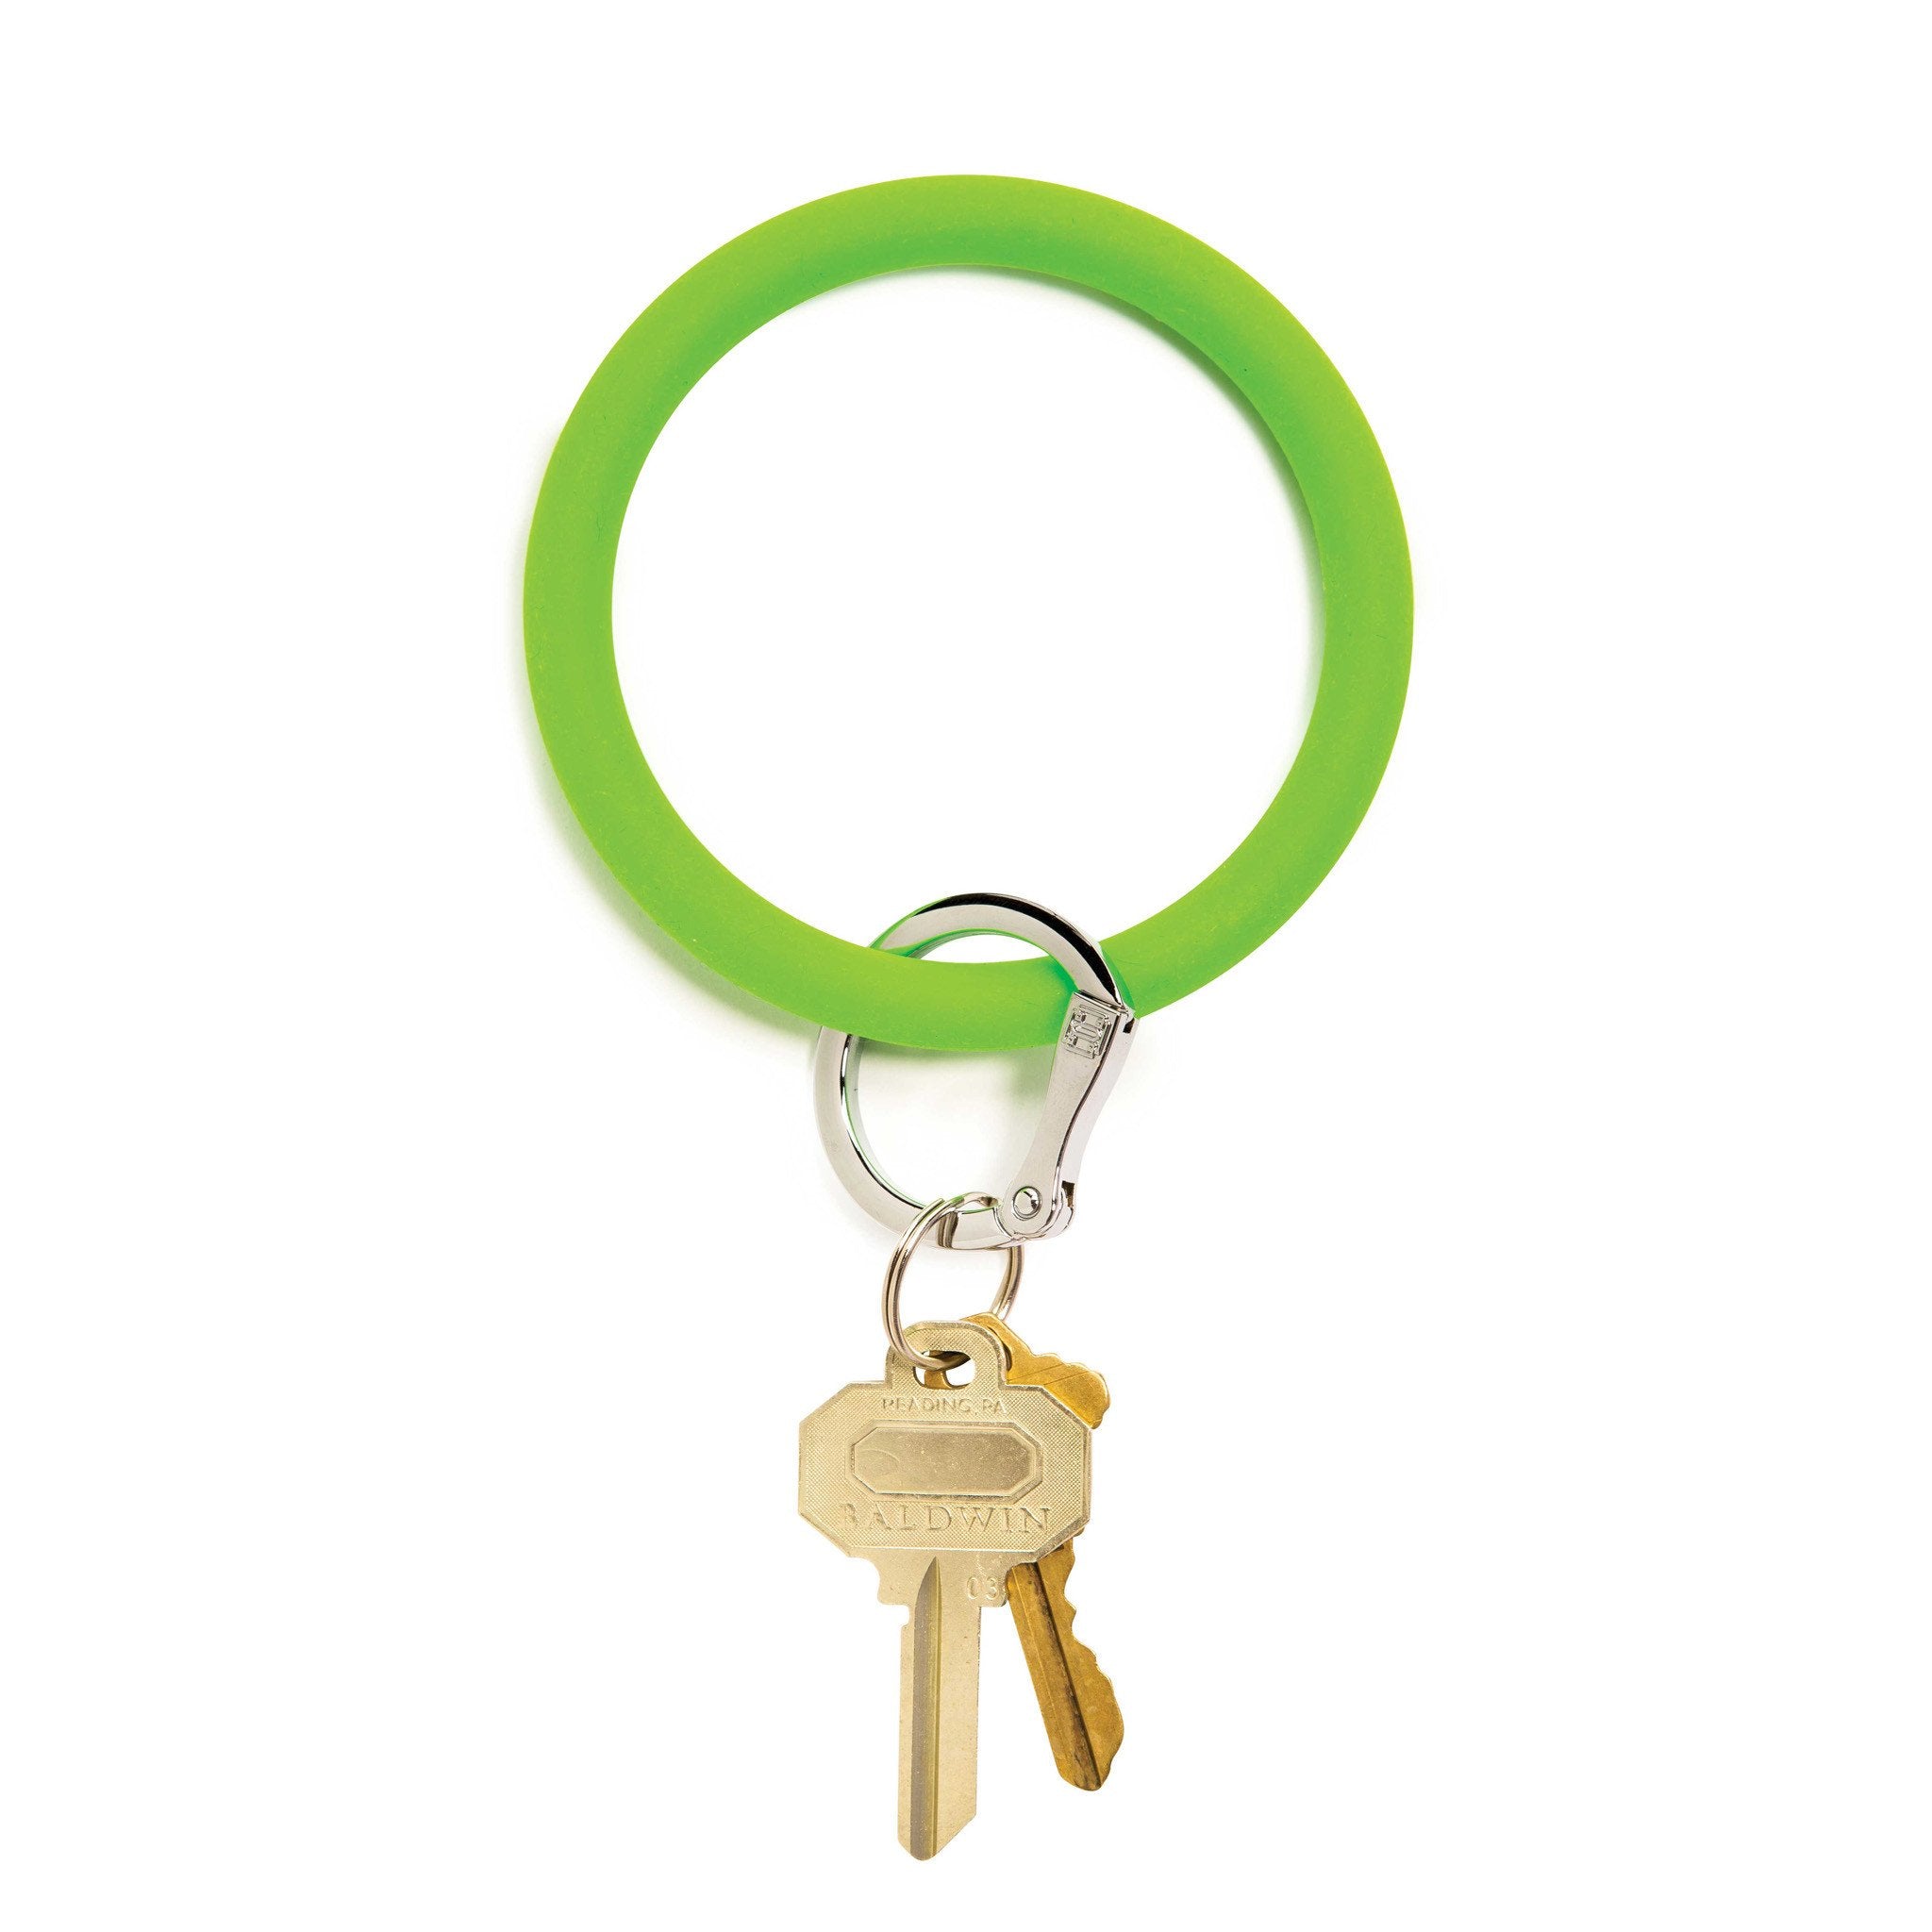 O-Venture Silicone Key Ring - In the Grass Green